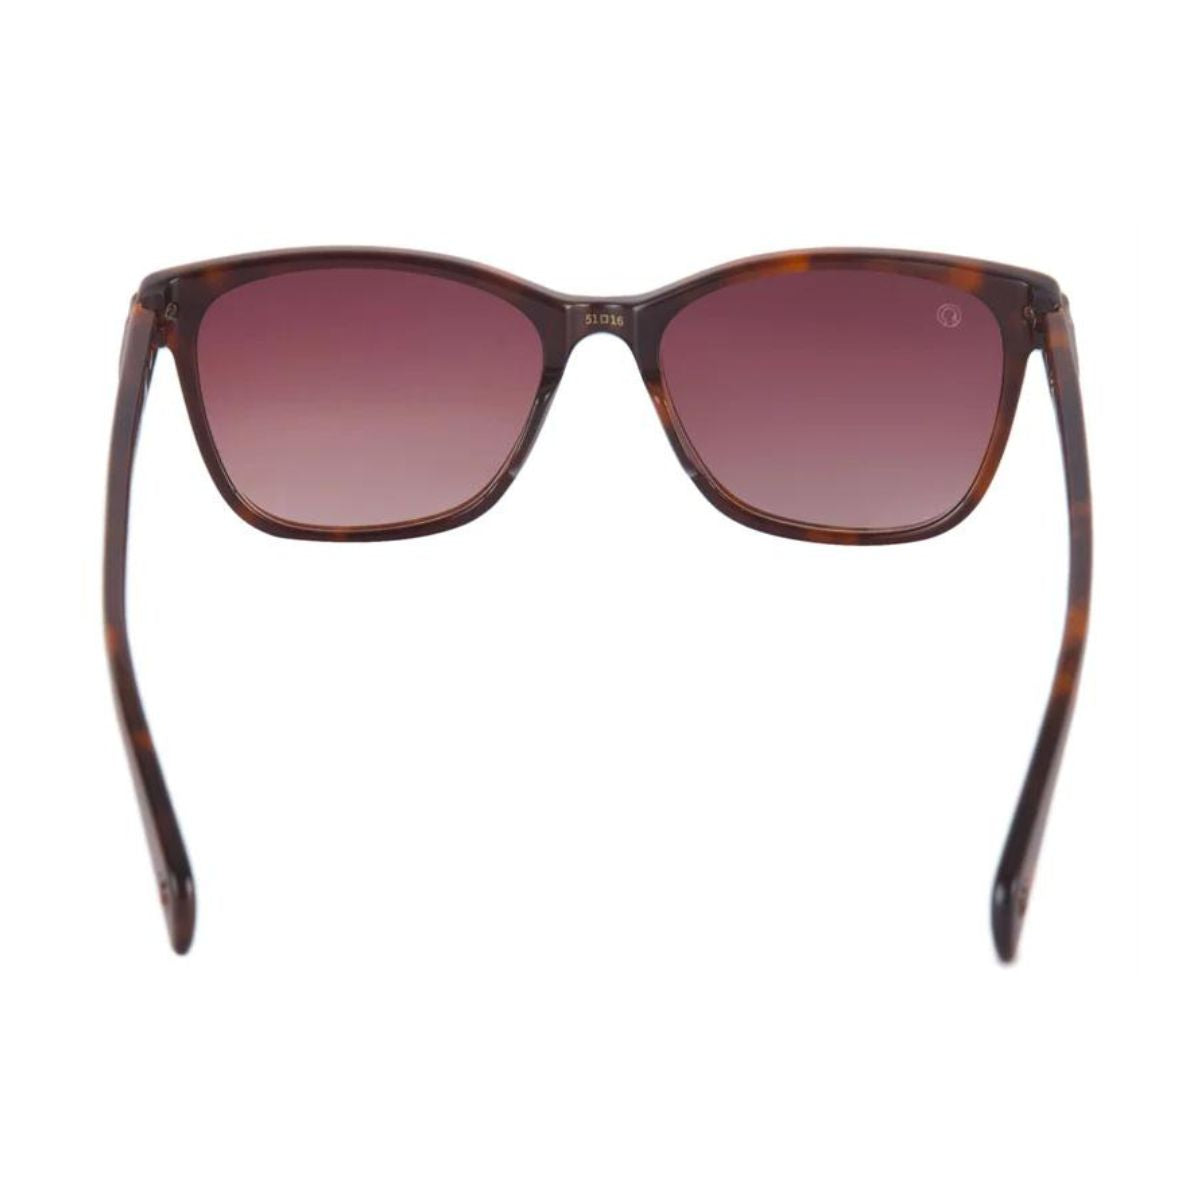 "The Monk Florence C2 Stylish Sunglass For Women's At Optorium"